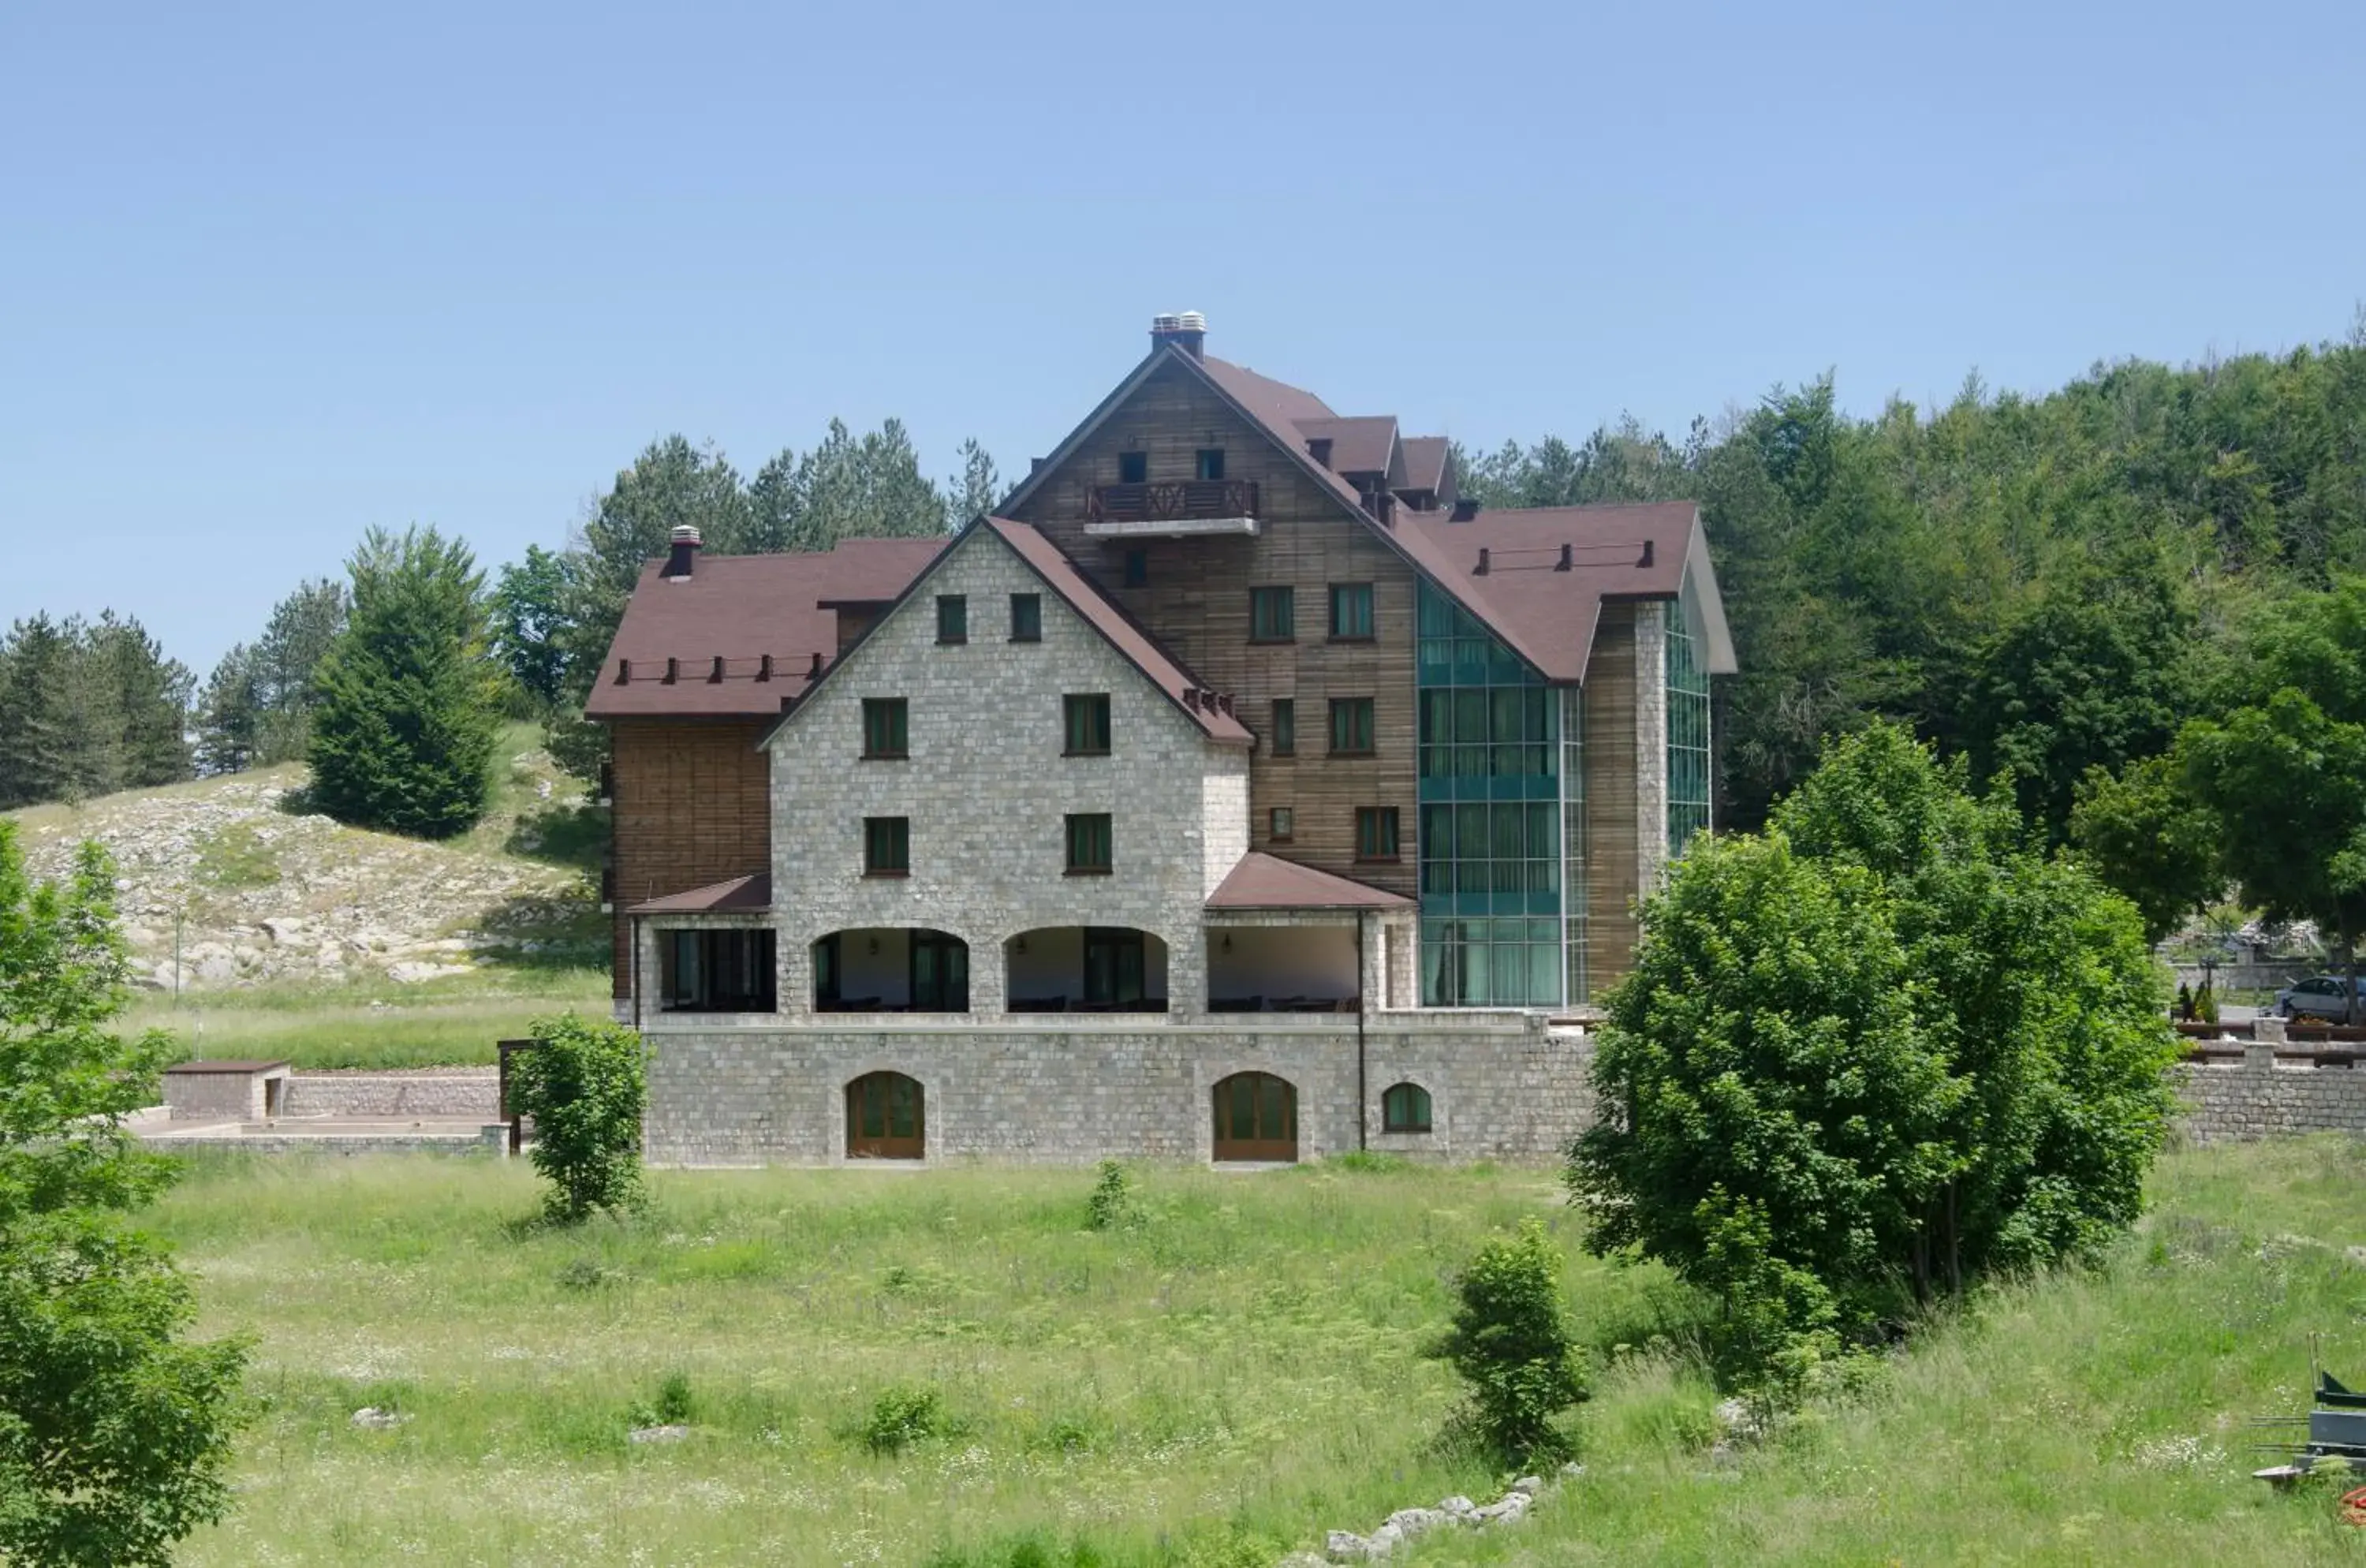 Property Building in Hotel Monte Rosa